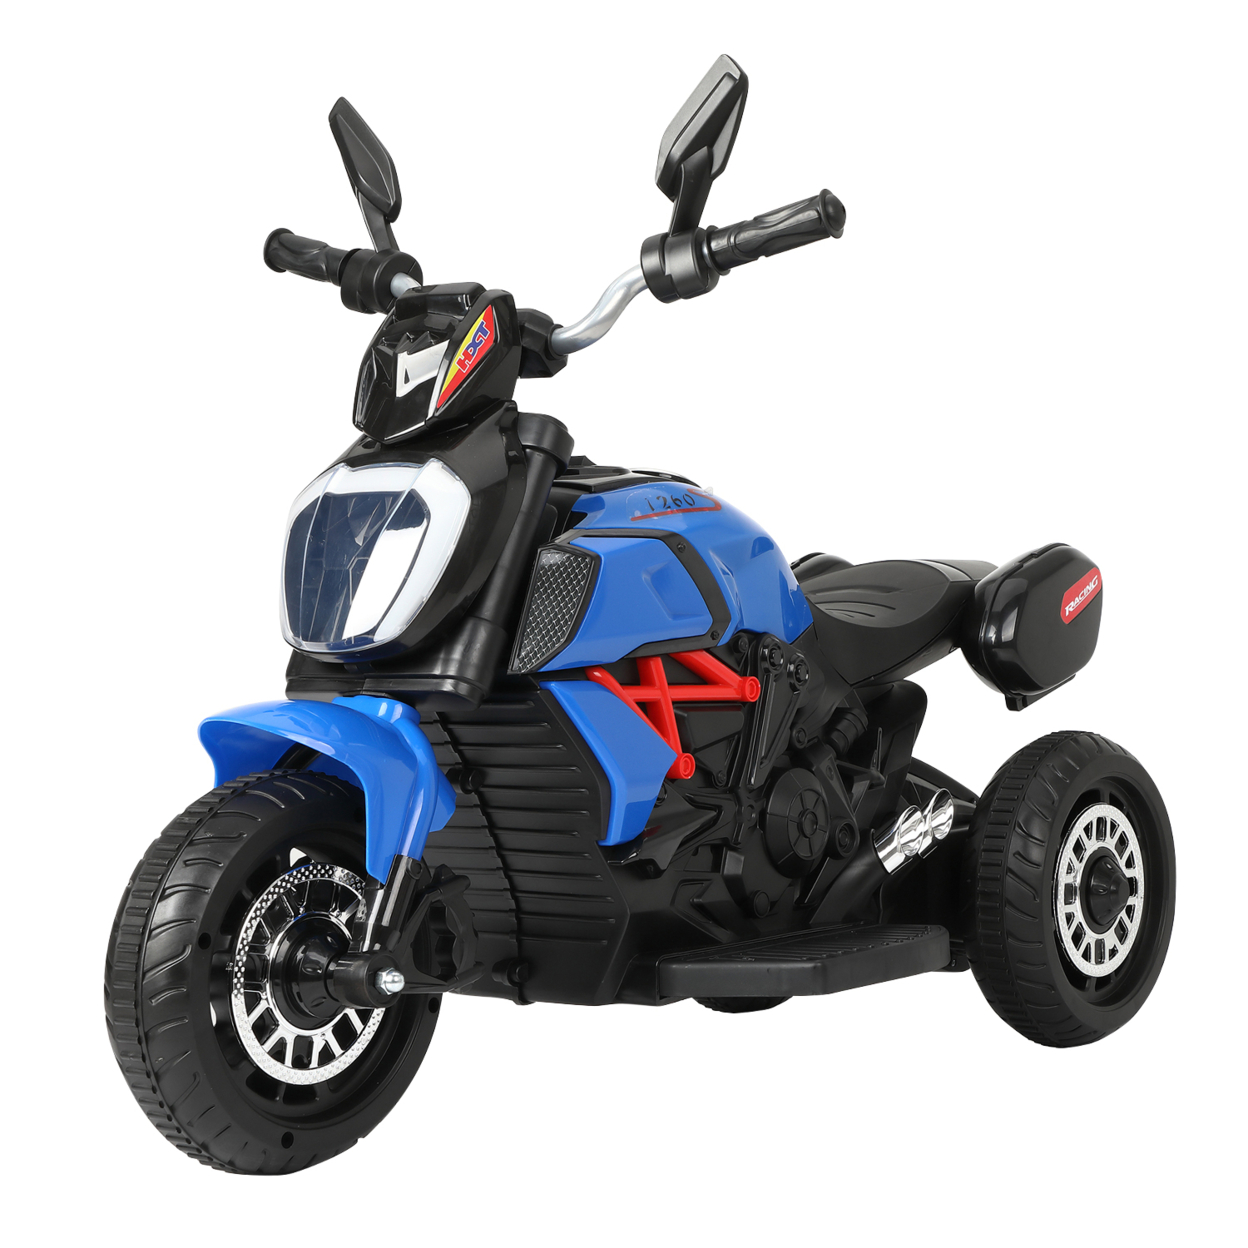 6V Kids Ride On Motorcycle with Headlights, Battery-Powered 3-Wheel Bicycle - Blue